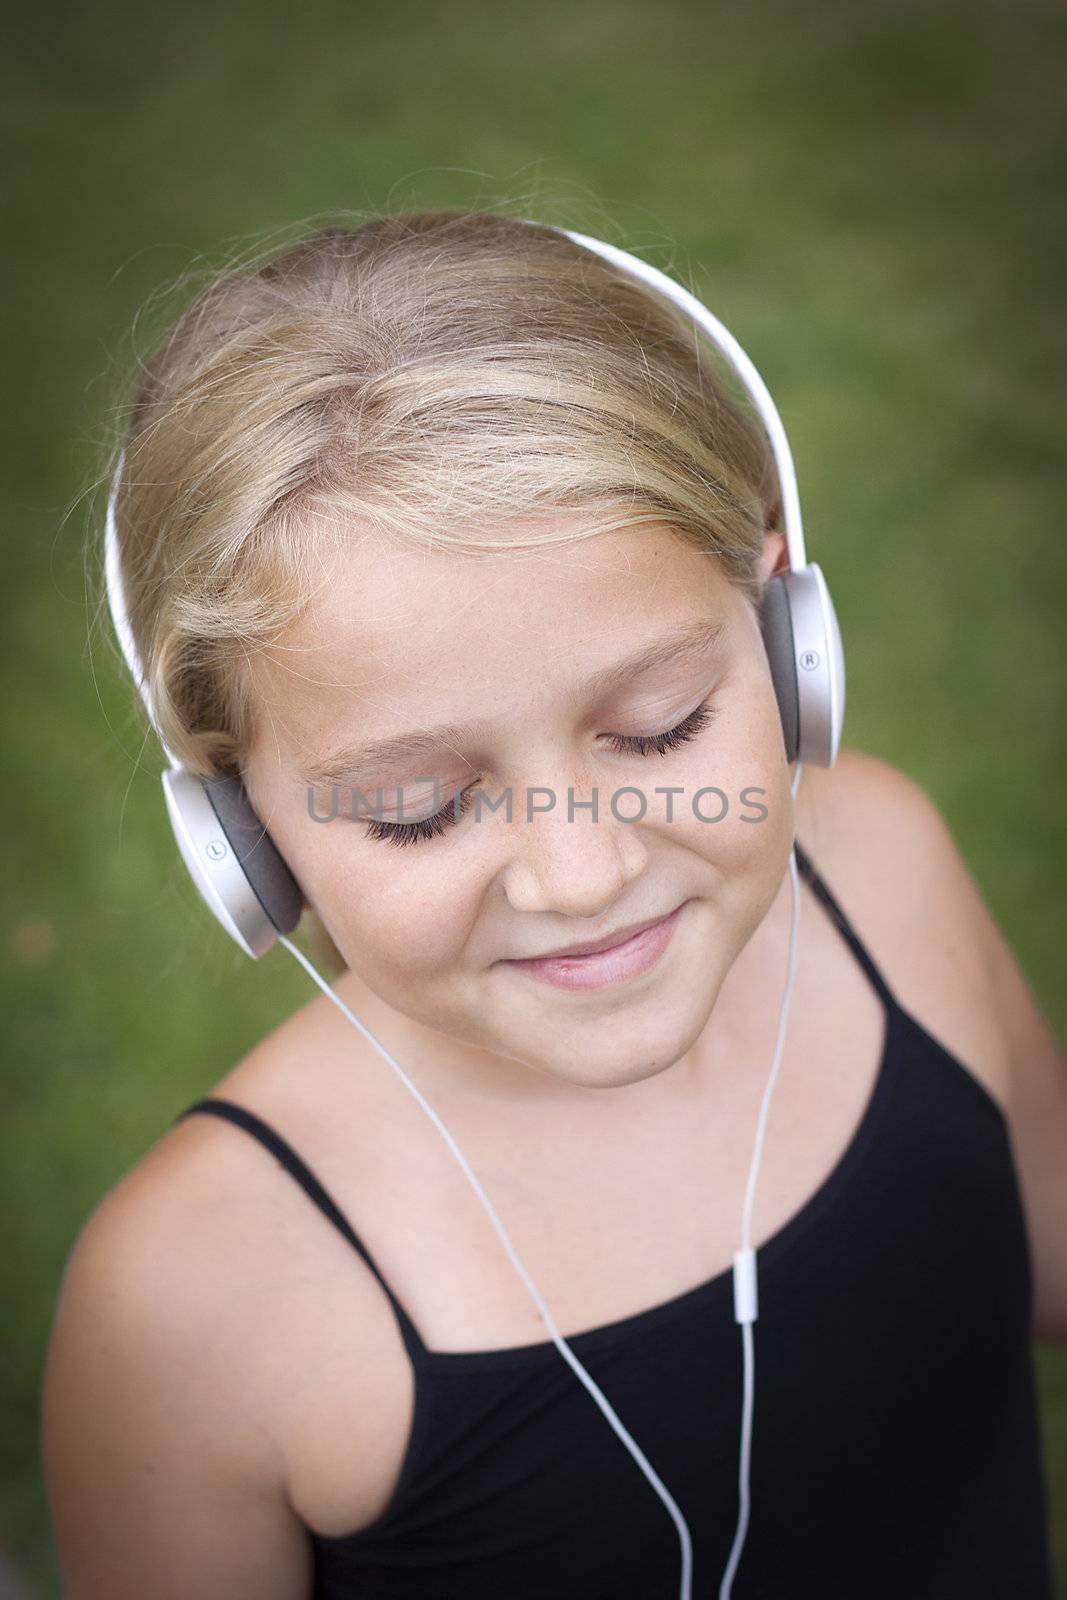 Girl with headset by annems